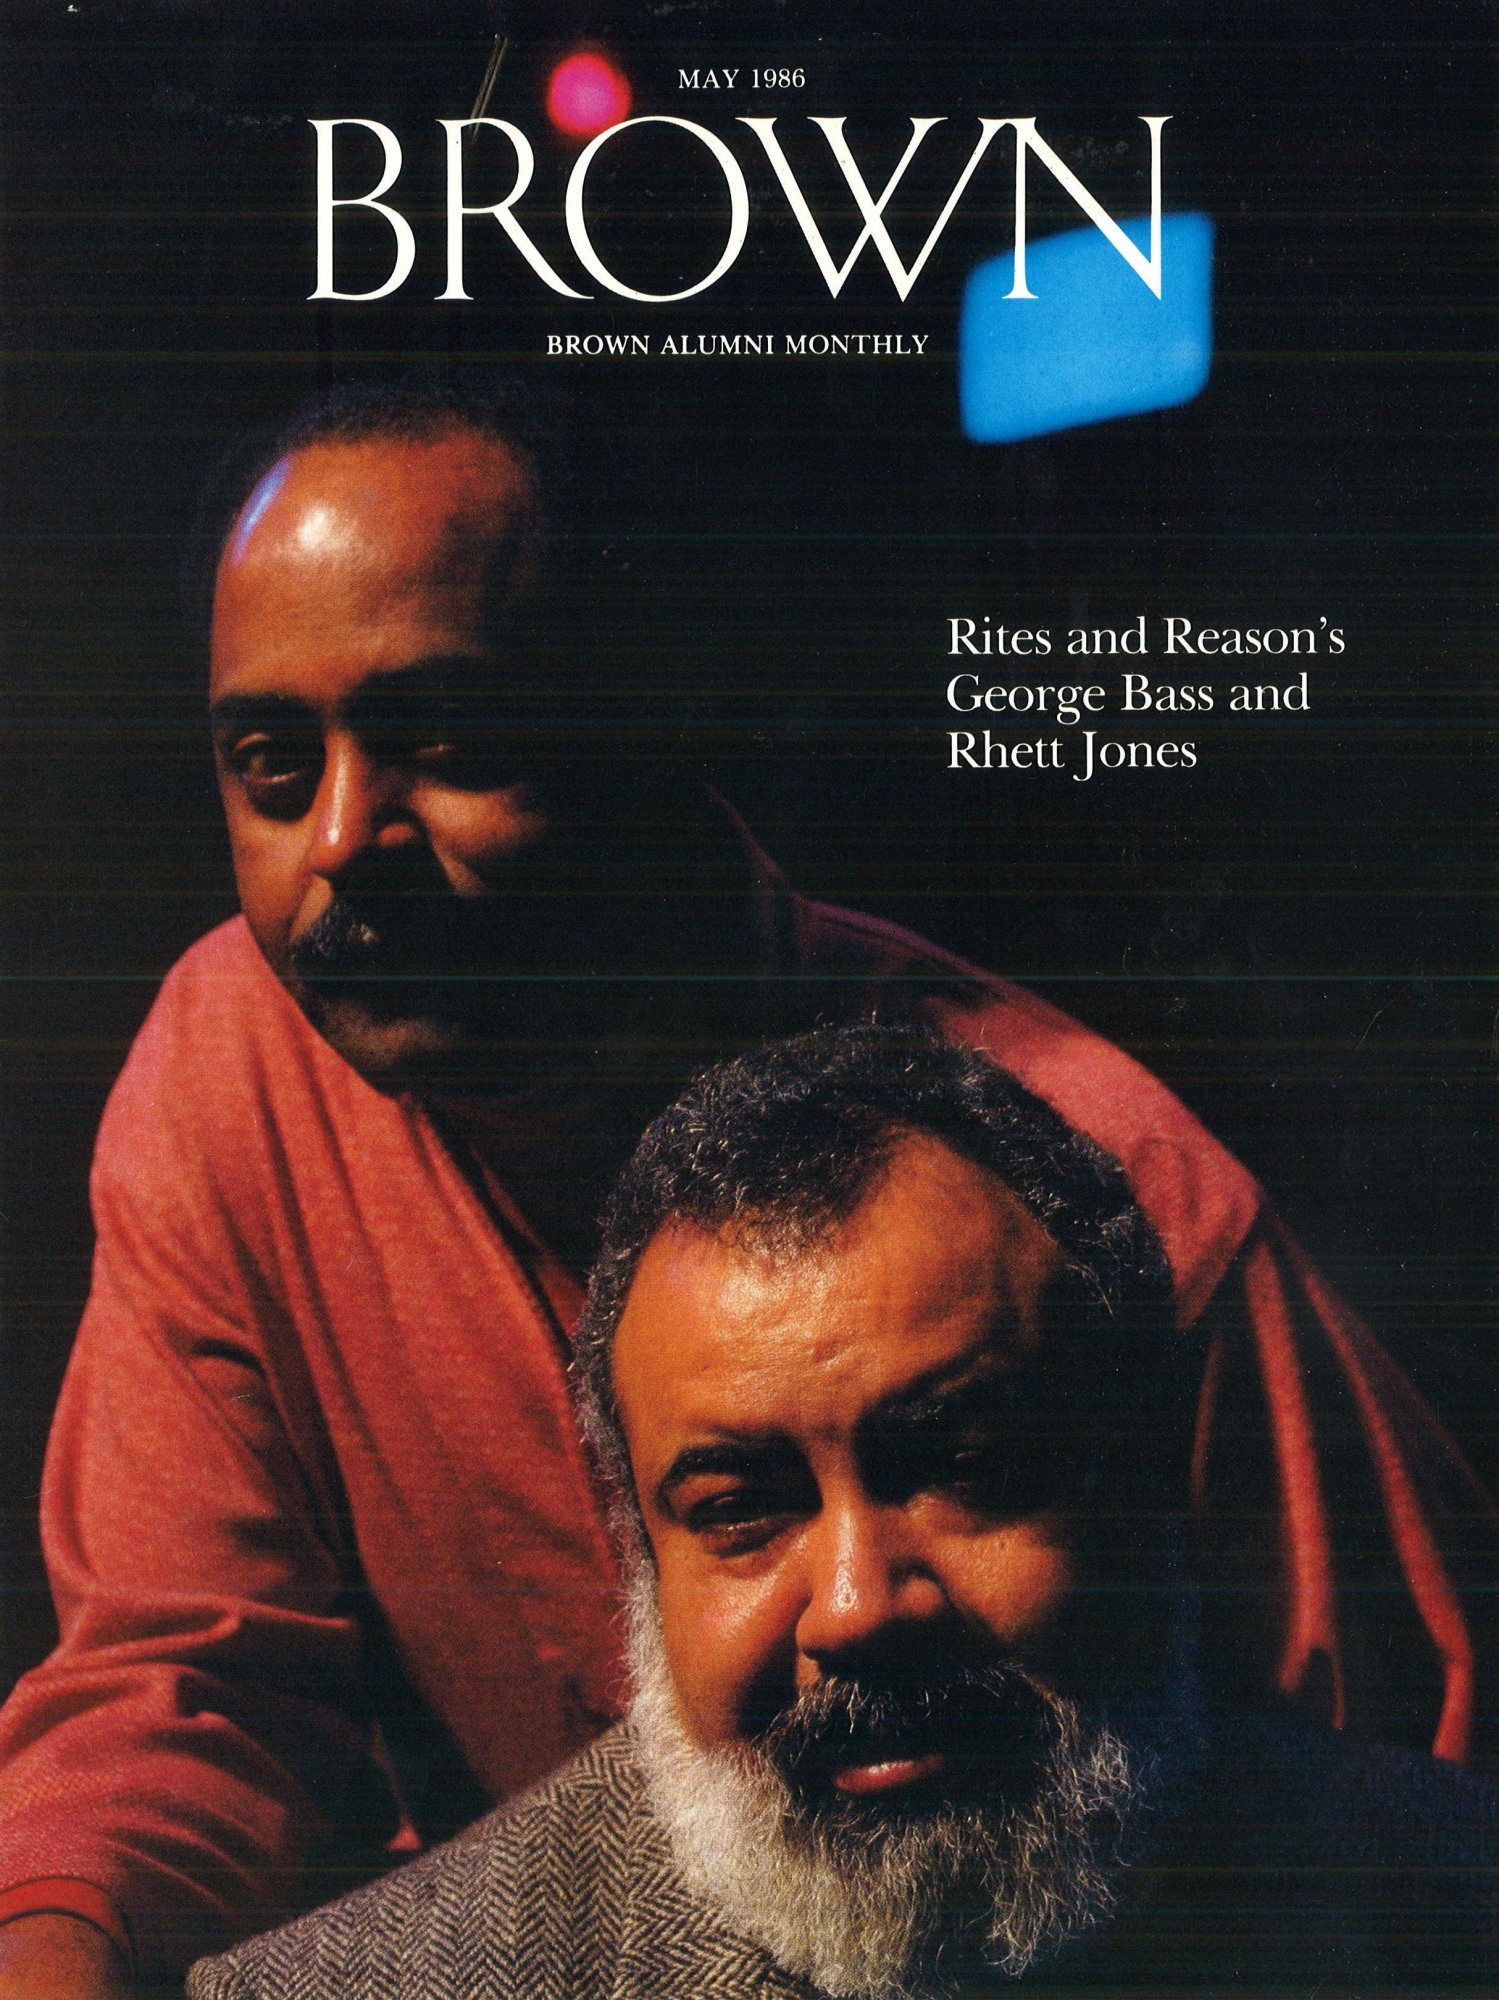 A scanned image of George Houston Bass and Rhett S. Jones on the cover of Brown Alumni Monthly, May 1986